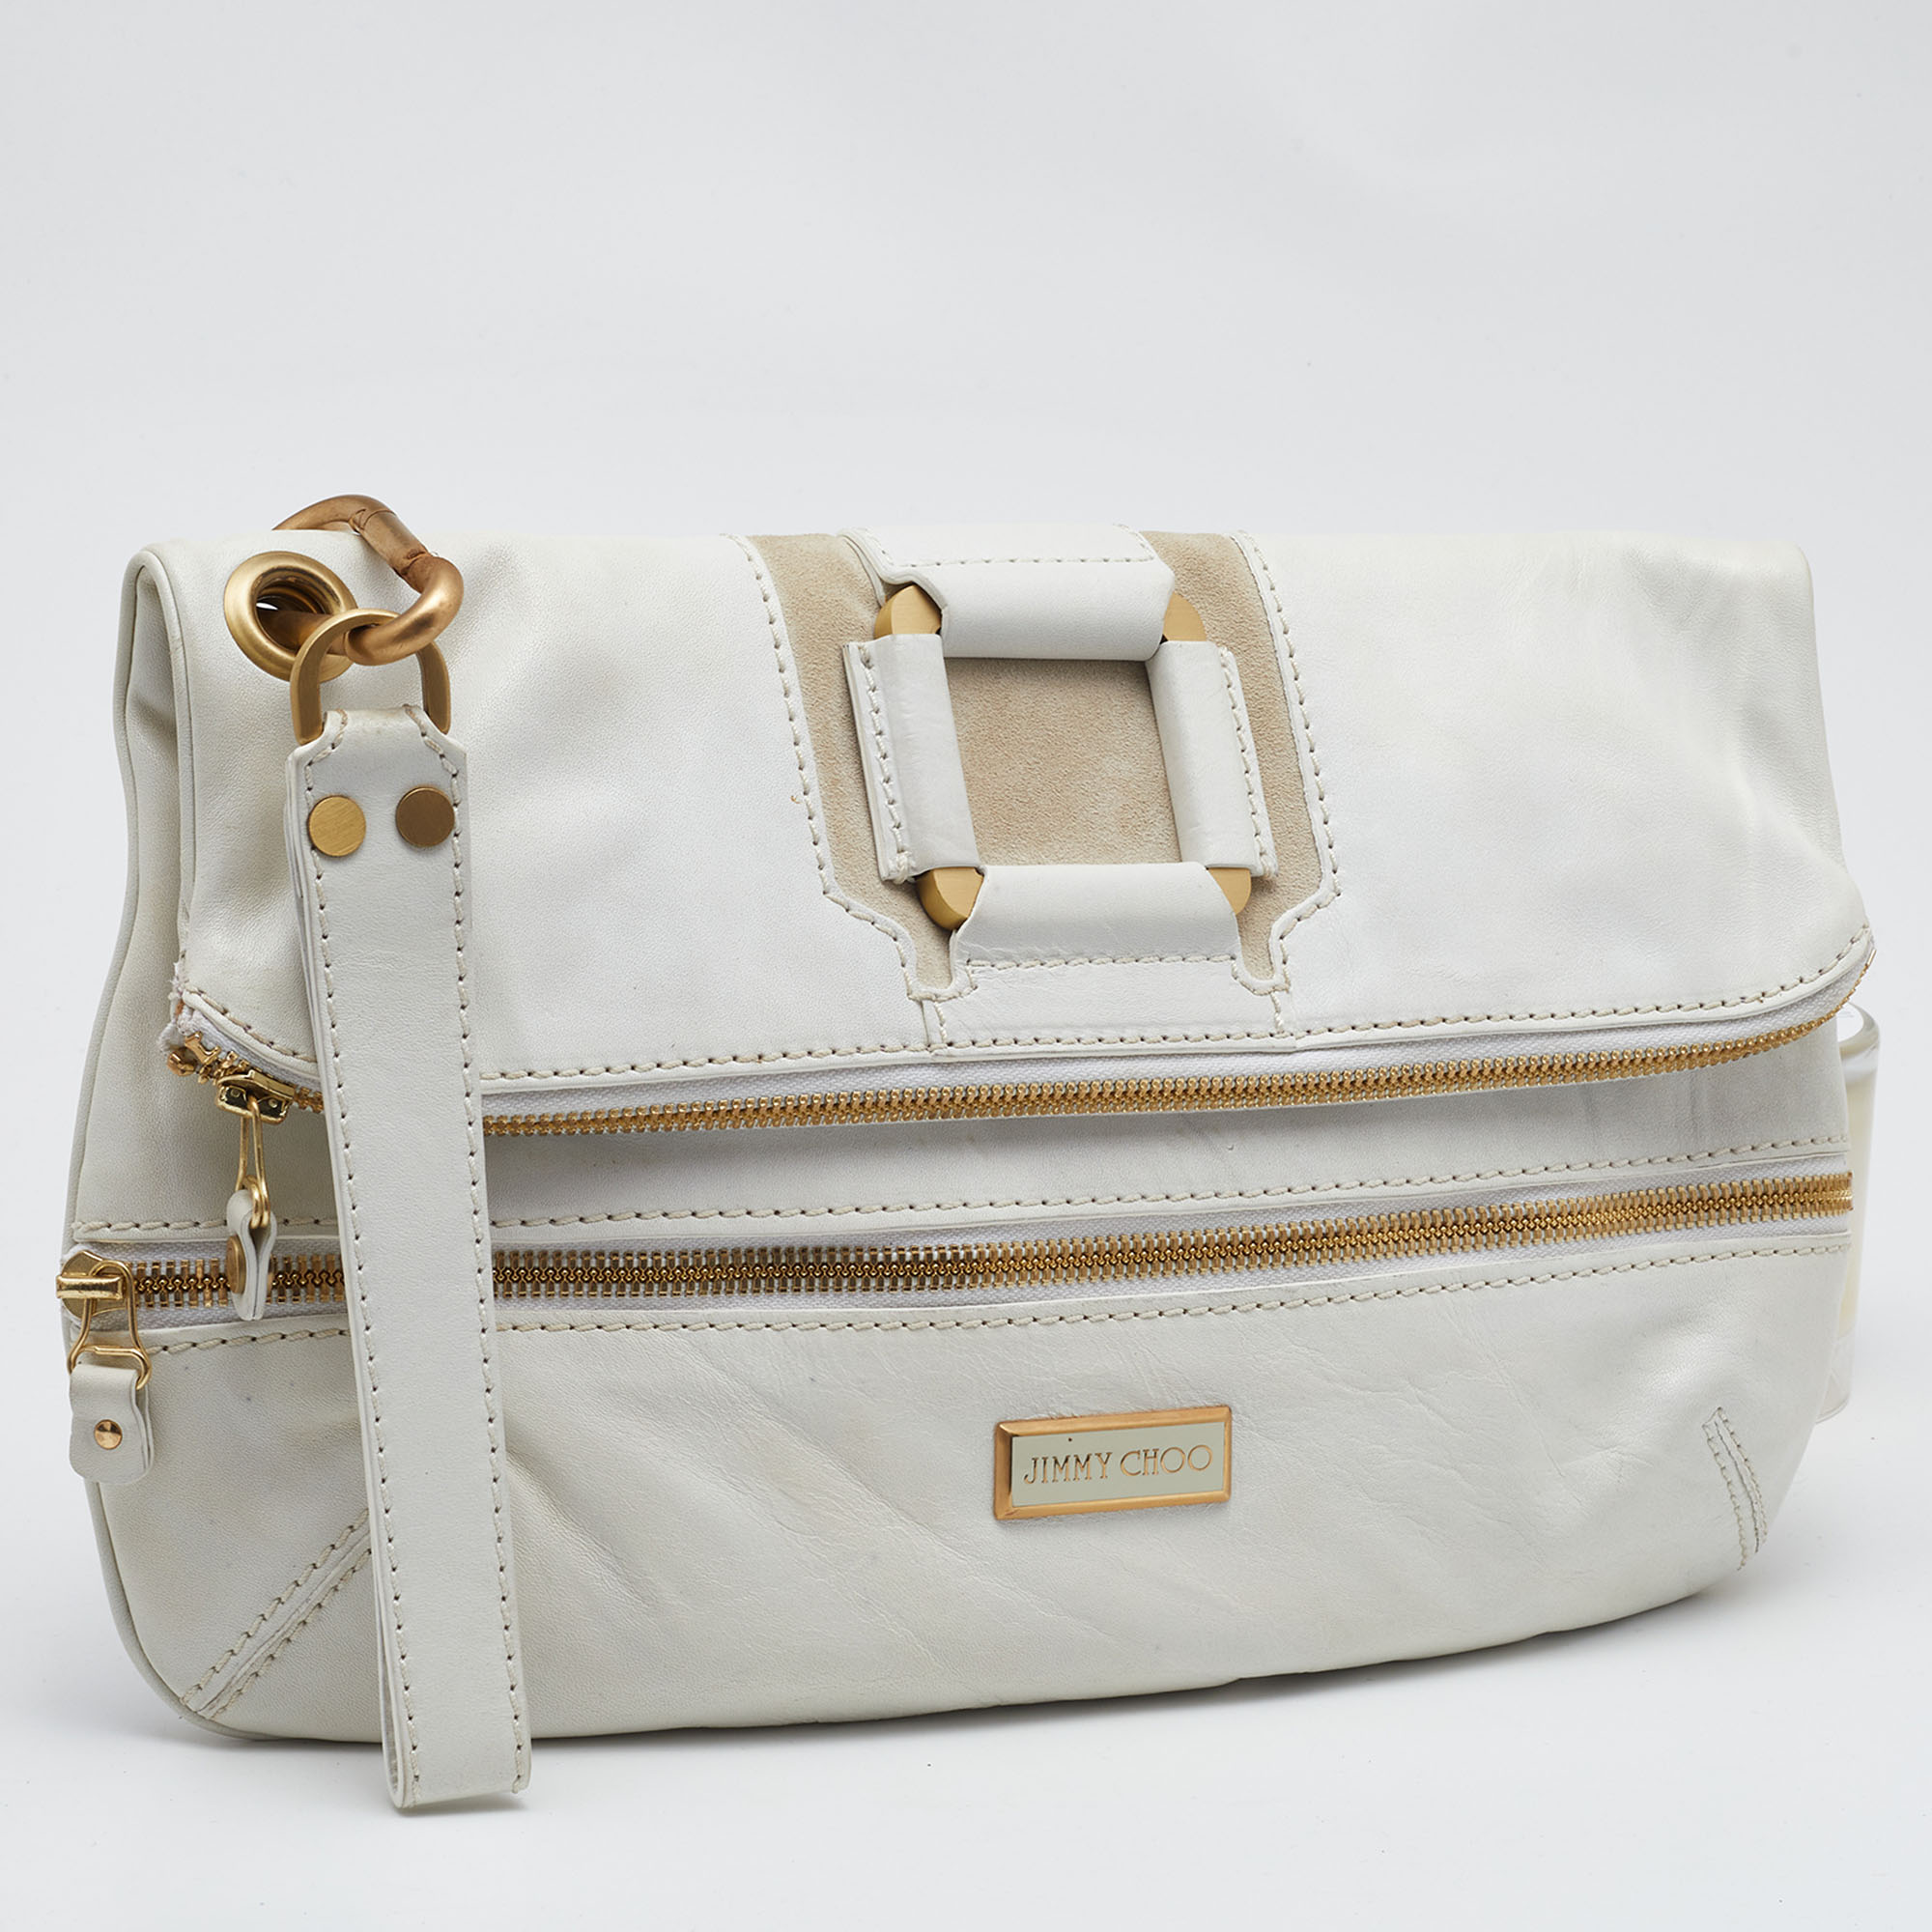 Jimmy Choo White Leather And Suede Large Mave Foldover Clutch